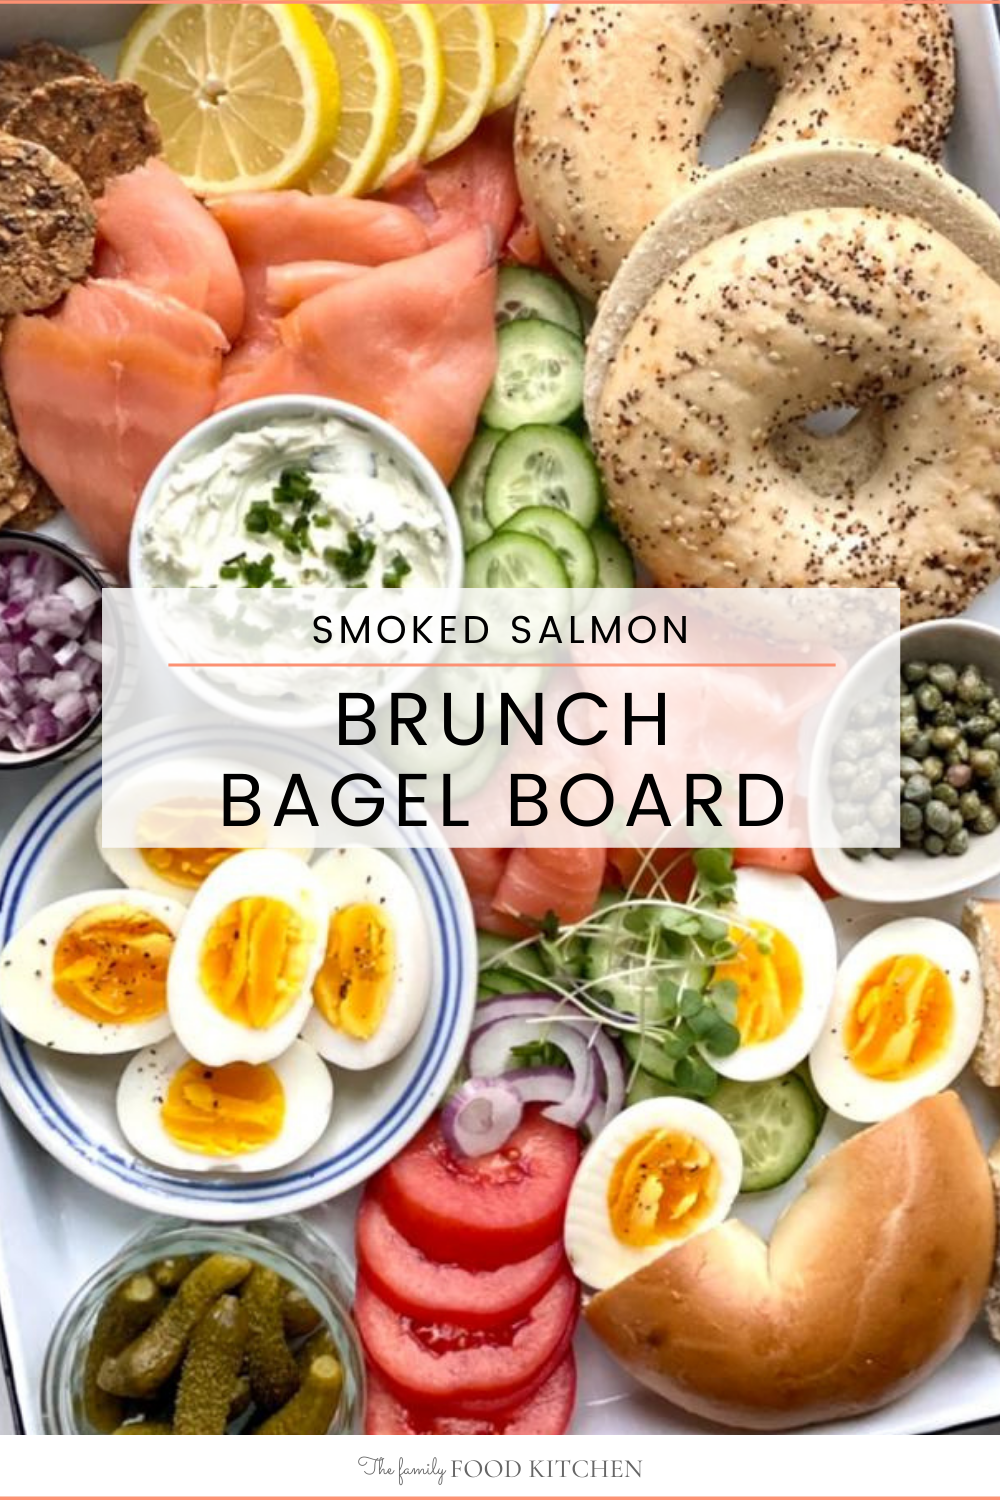 Bagel Board - The Family Food Kitchen